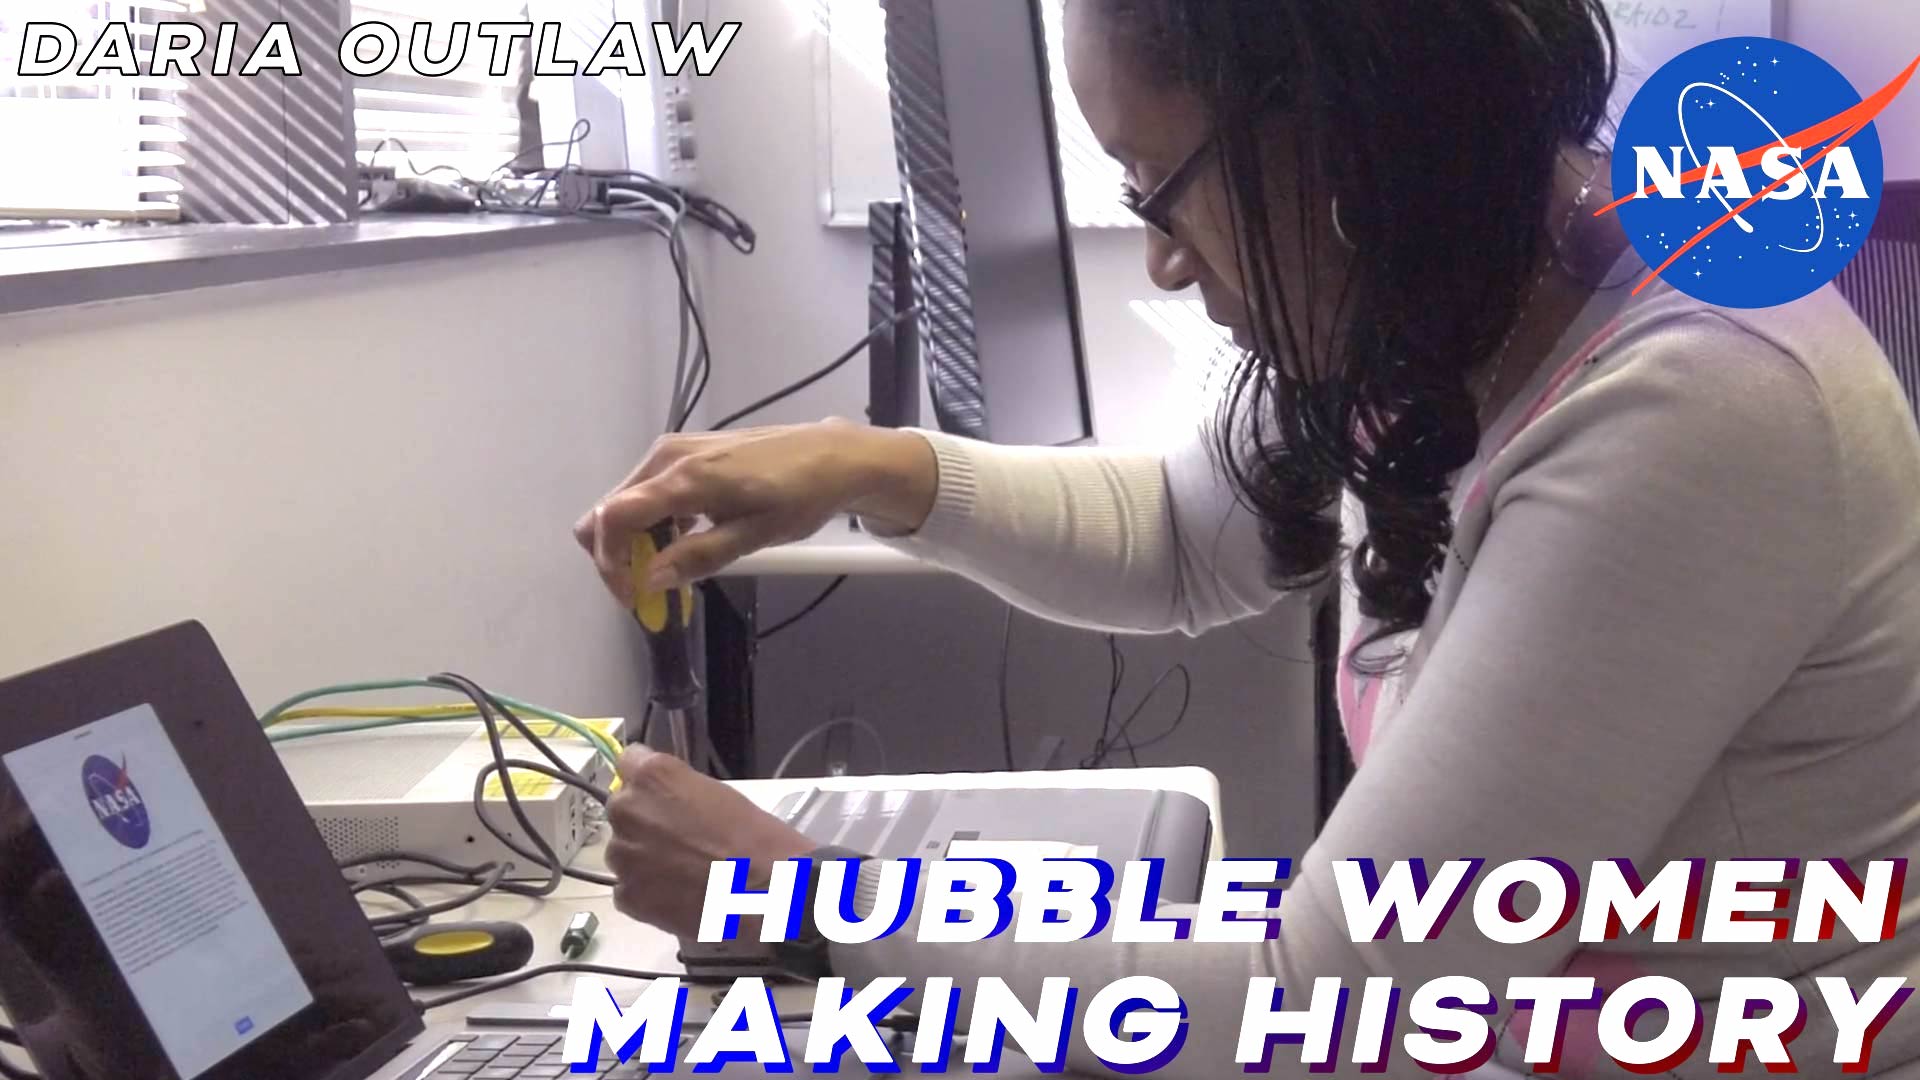 Preview Image for Hubble Women Making History: Daria Outlaw